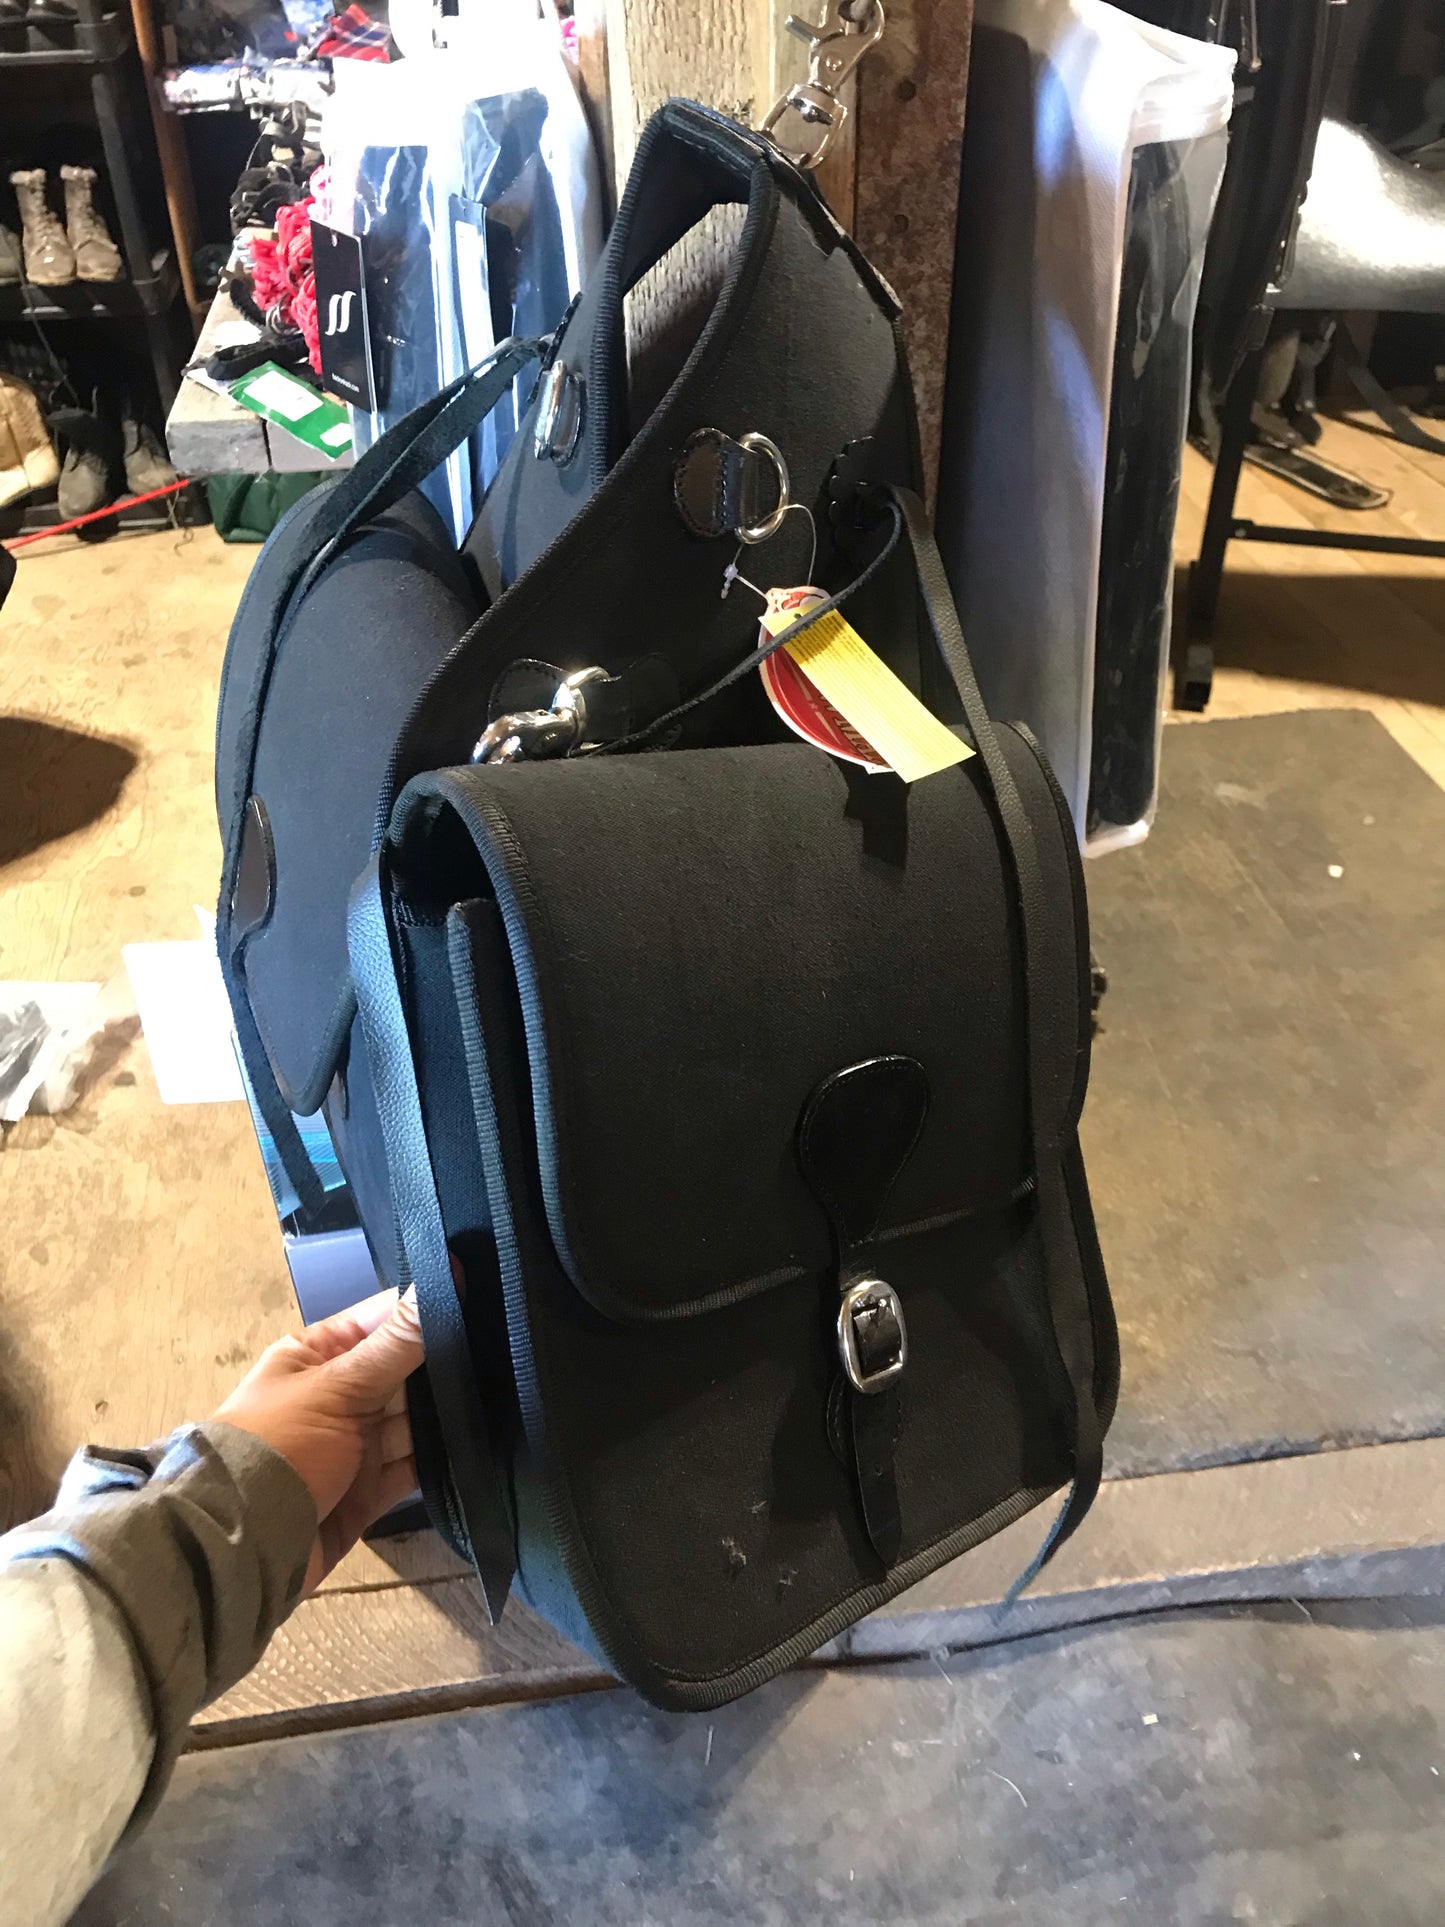 Deluxe trail saddle bags